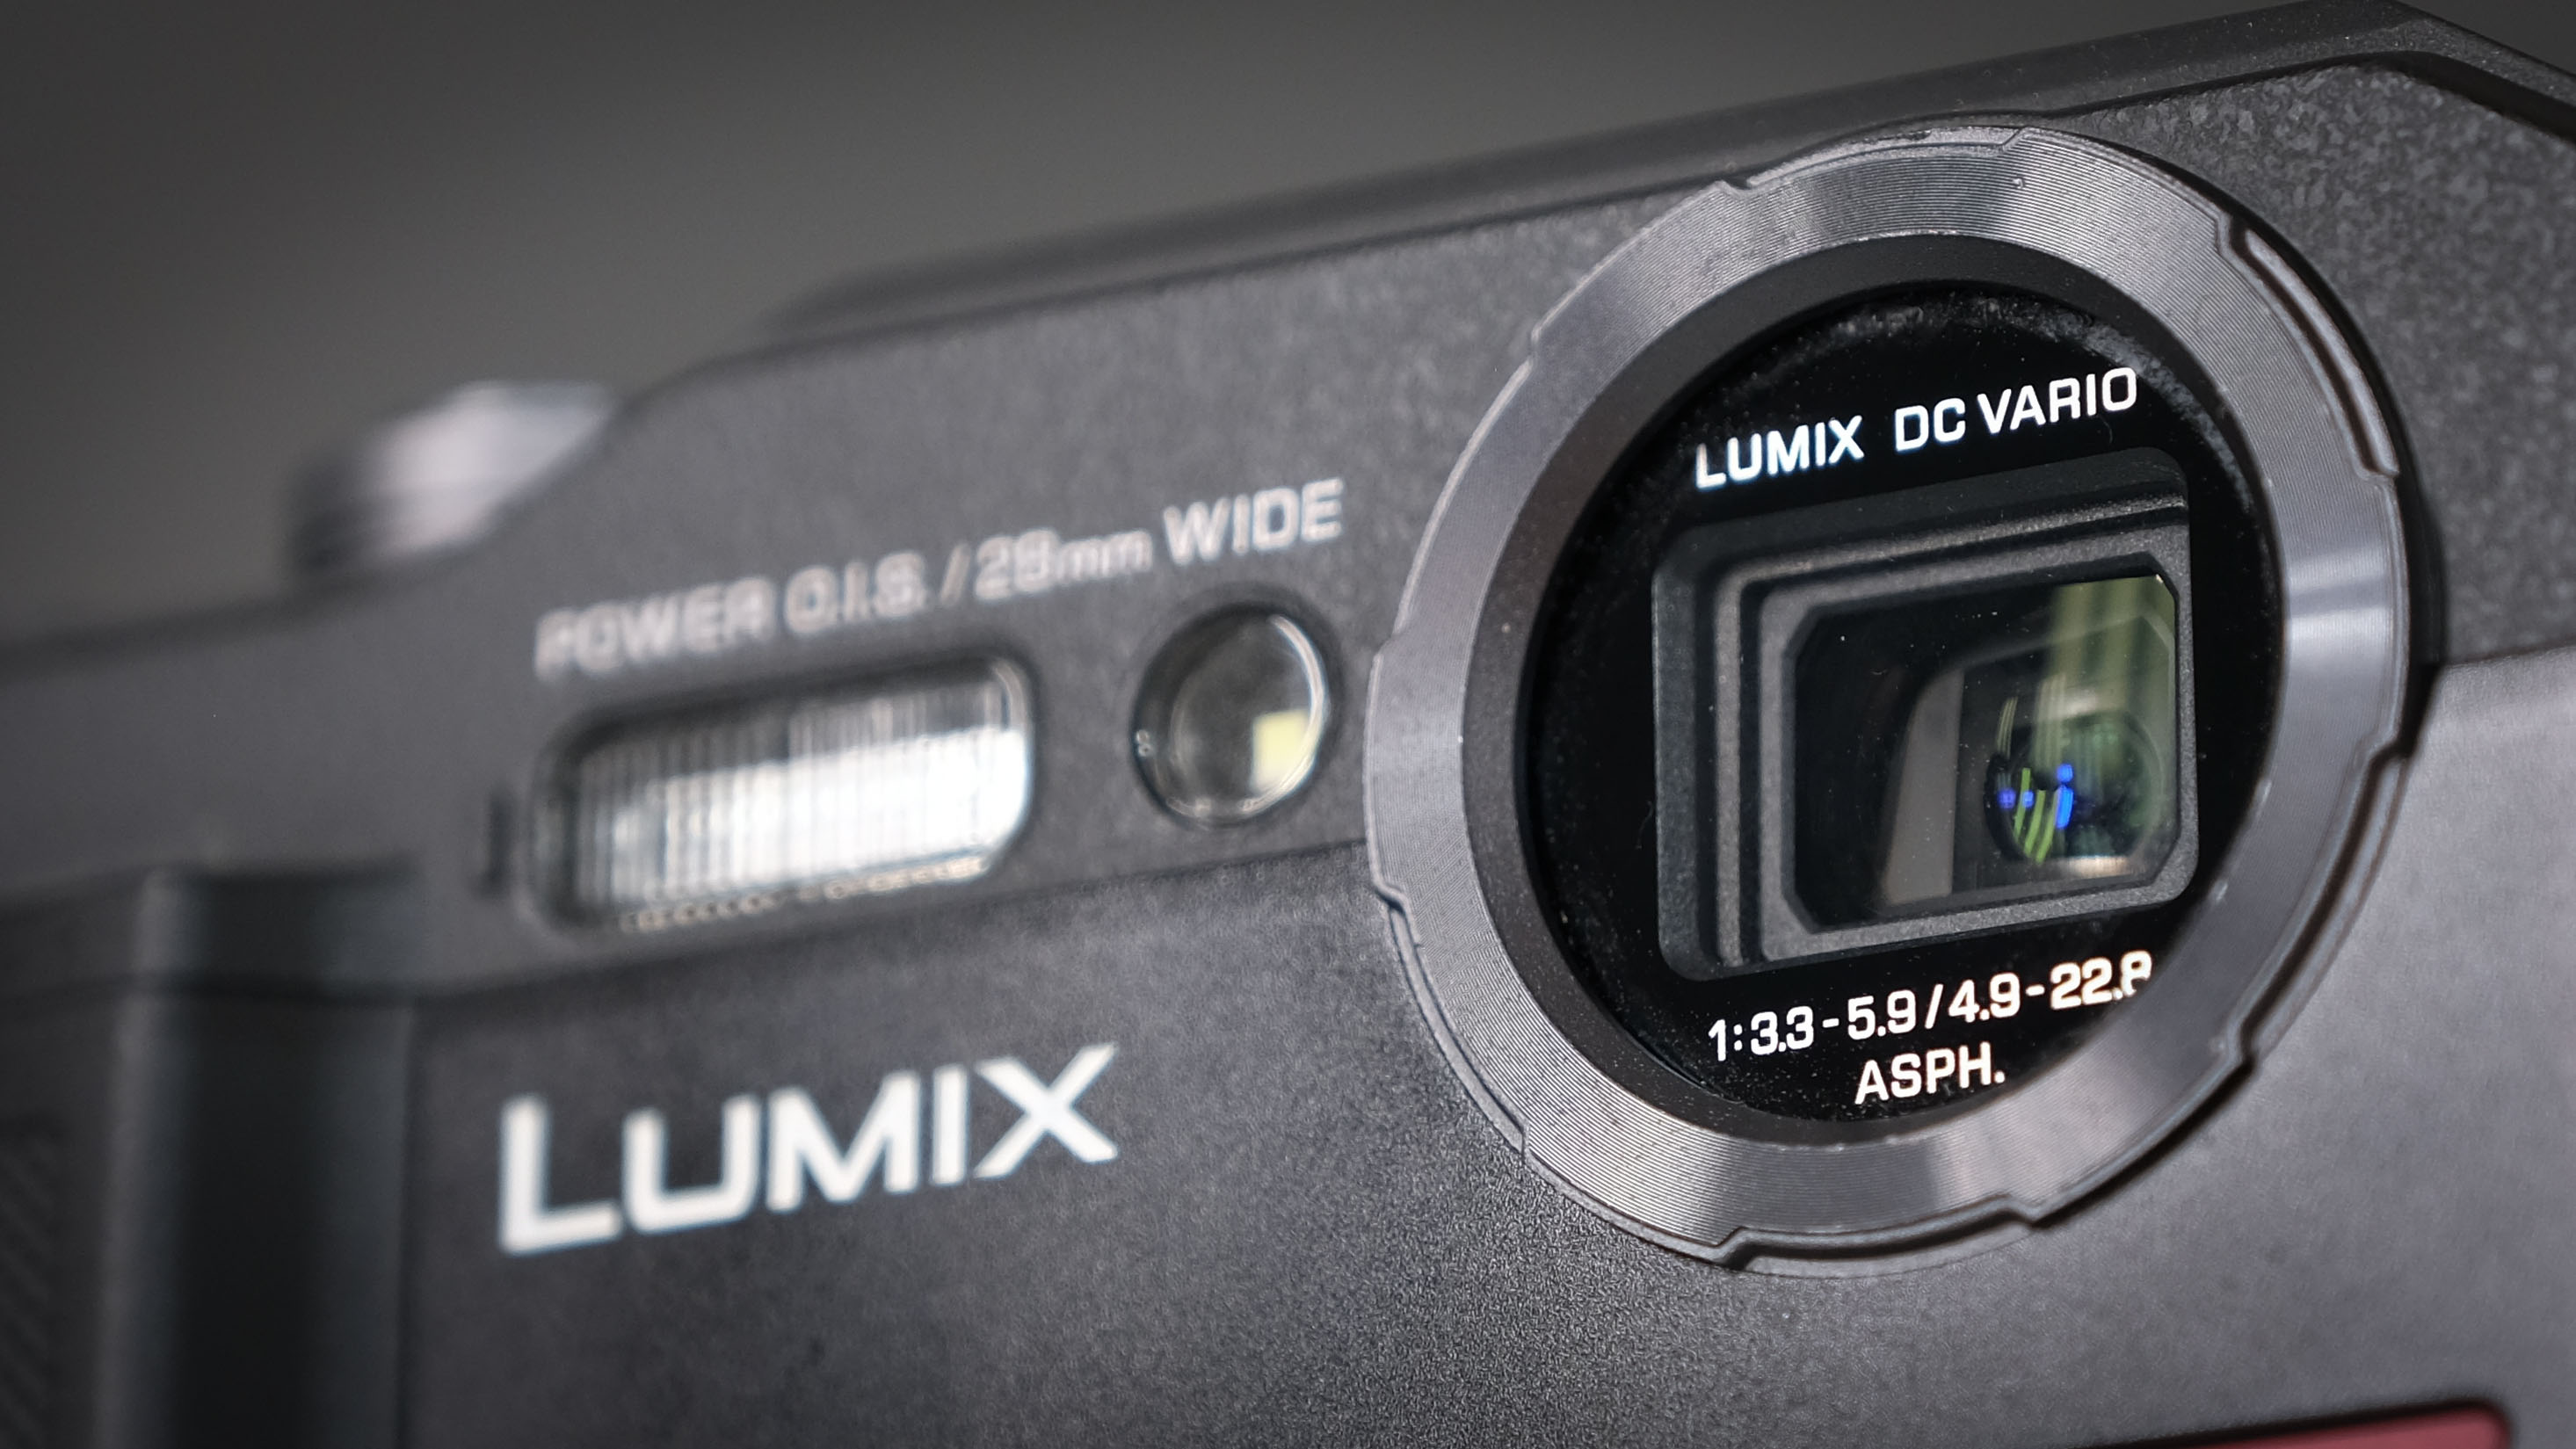 Panasonic LUMIX TS7 / FT7 Review - Is This the Rugged Camera for 